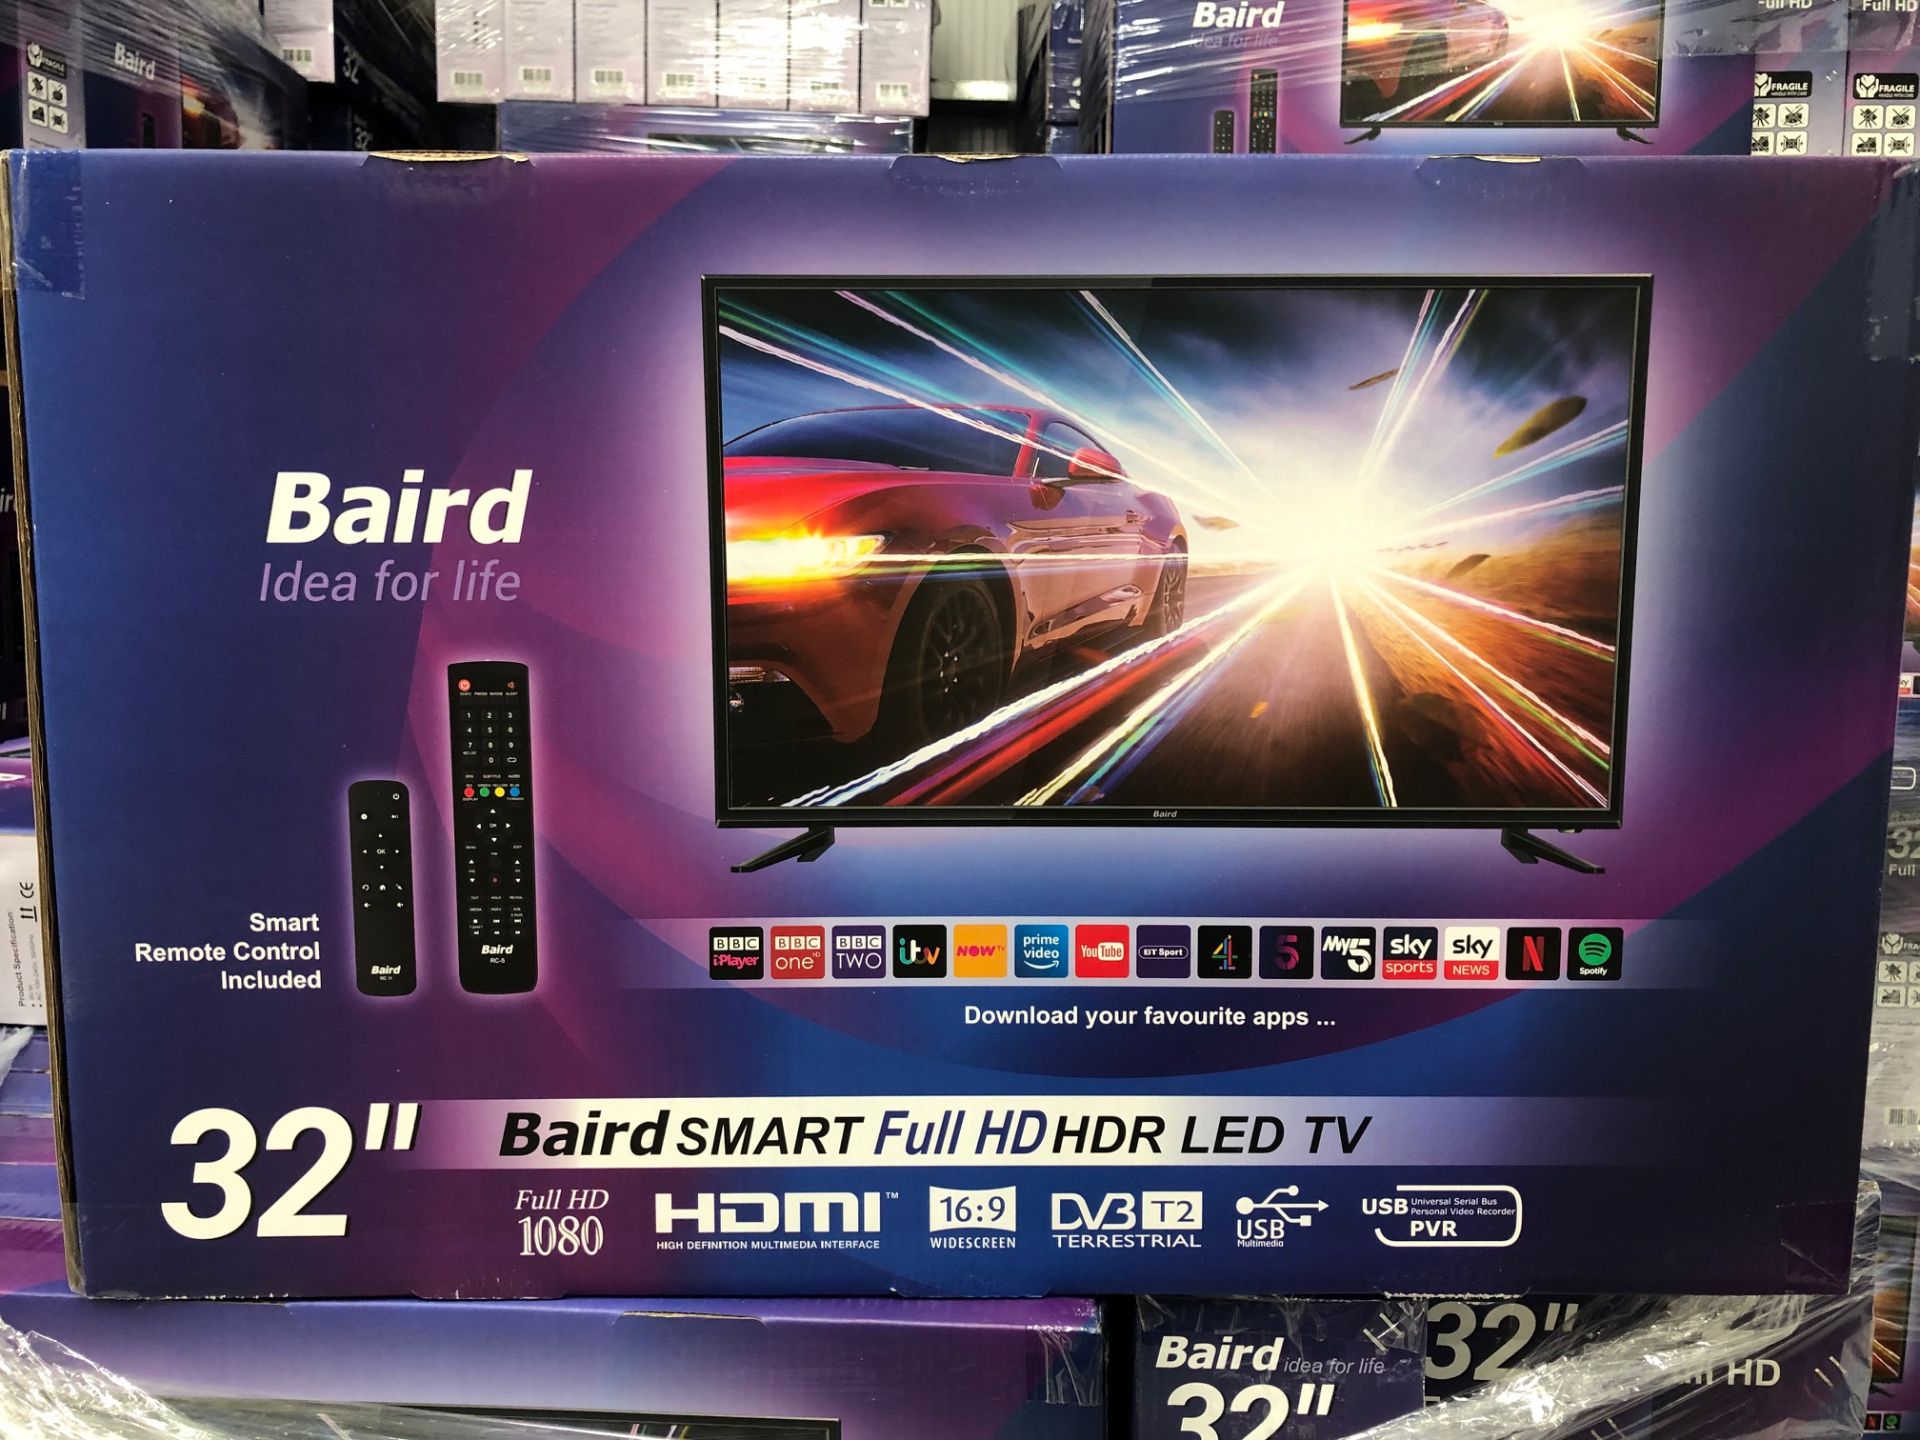 Ten Boxed Unused Baird 32" FULL HD TV's, with buil